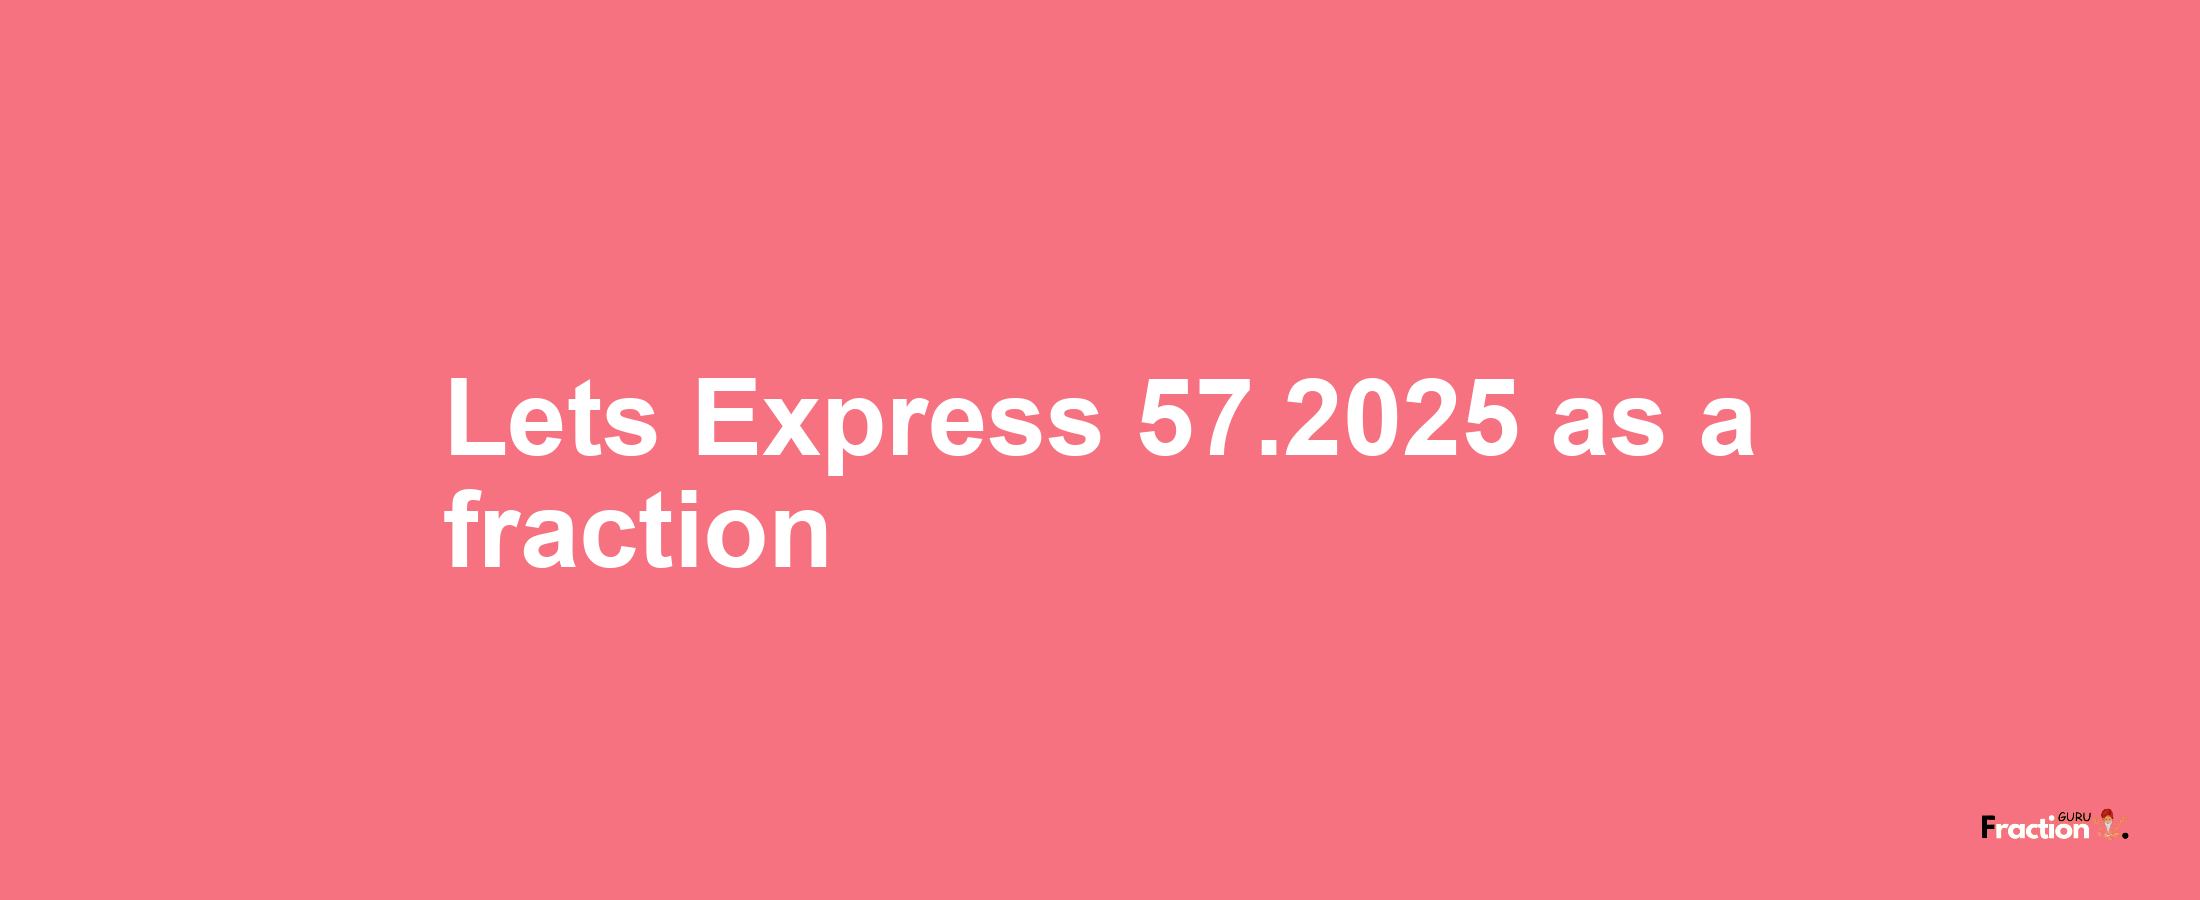 Lets Express 57.2025 as afraction